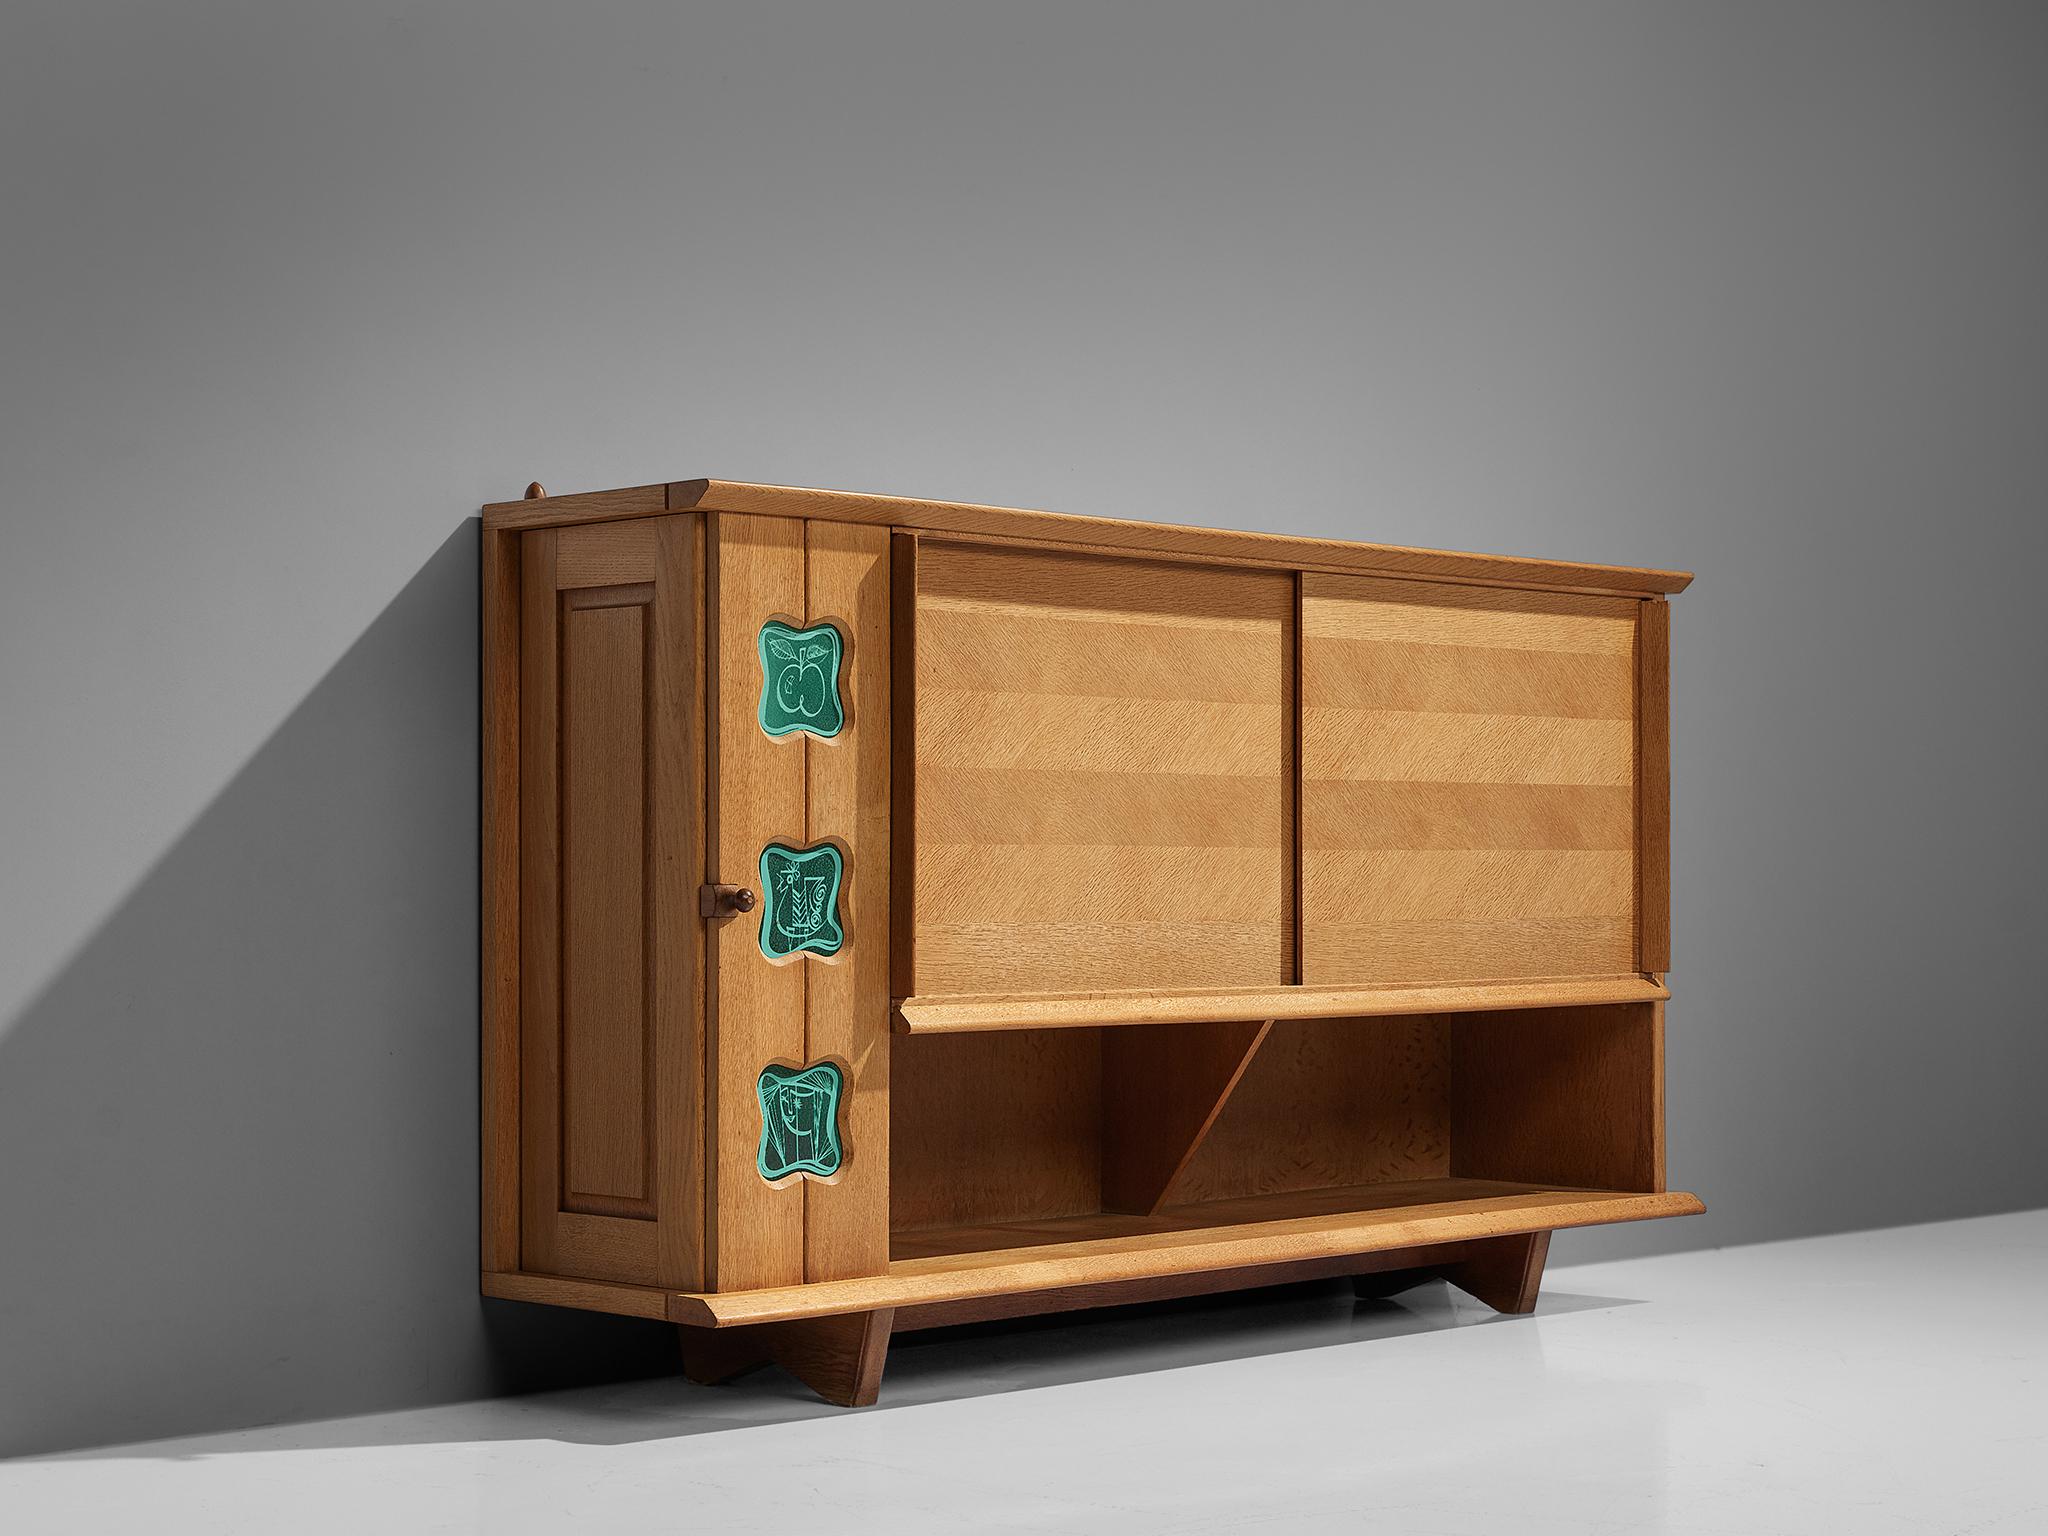 Guillerme et Chambron for Votre Maison, high sideboard, solid oak, France, 1960s,

This characteristic cabinet in solid oak is designed by the French designer duo Jacques Chambron (1914-2001) and Robert Guillerme, (1913-1990). It features two